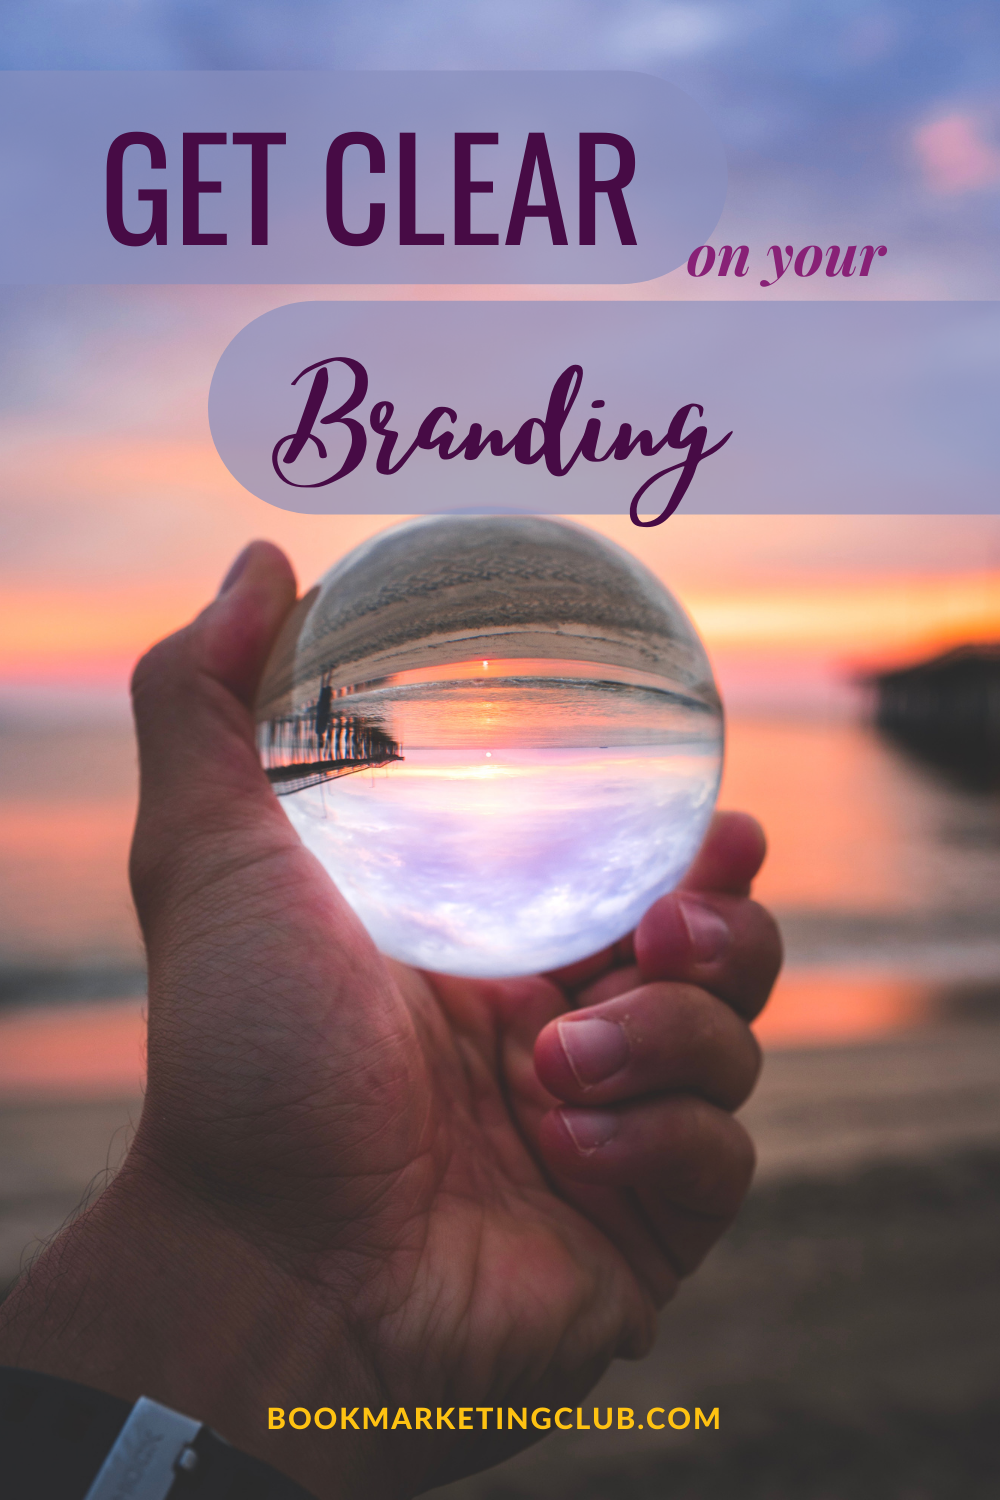 Get clear on your branding.